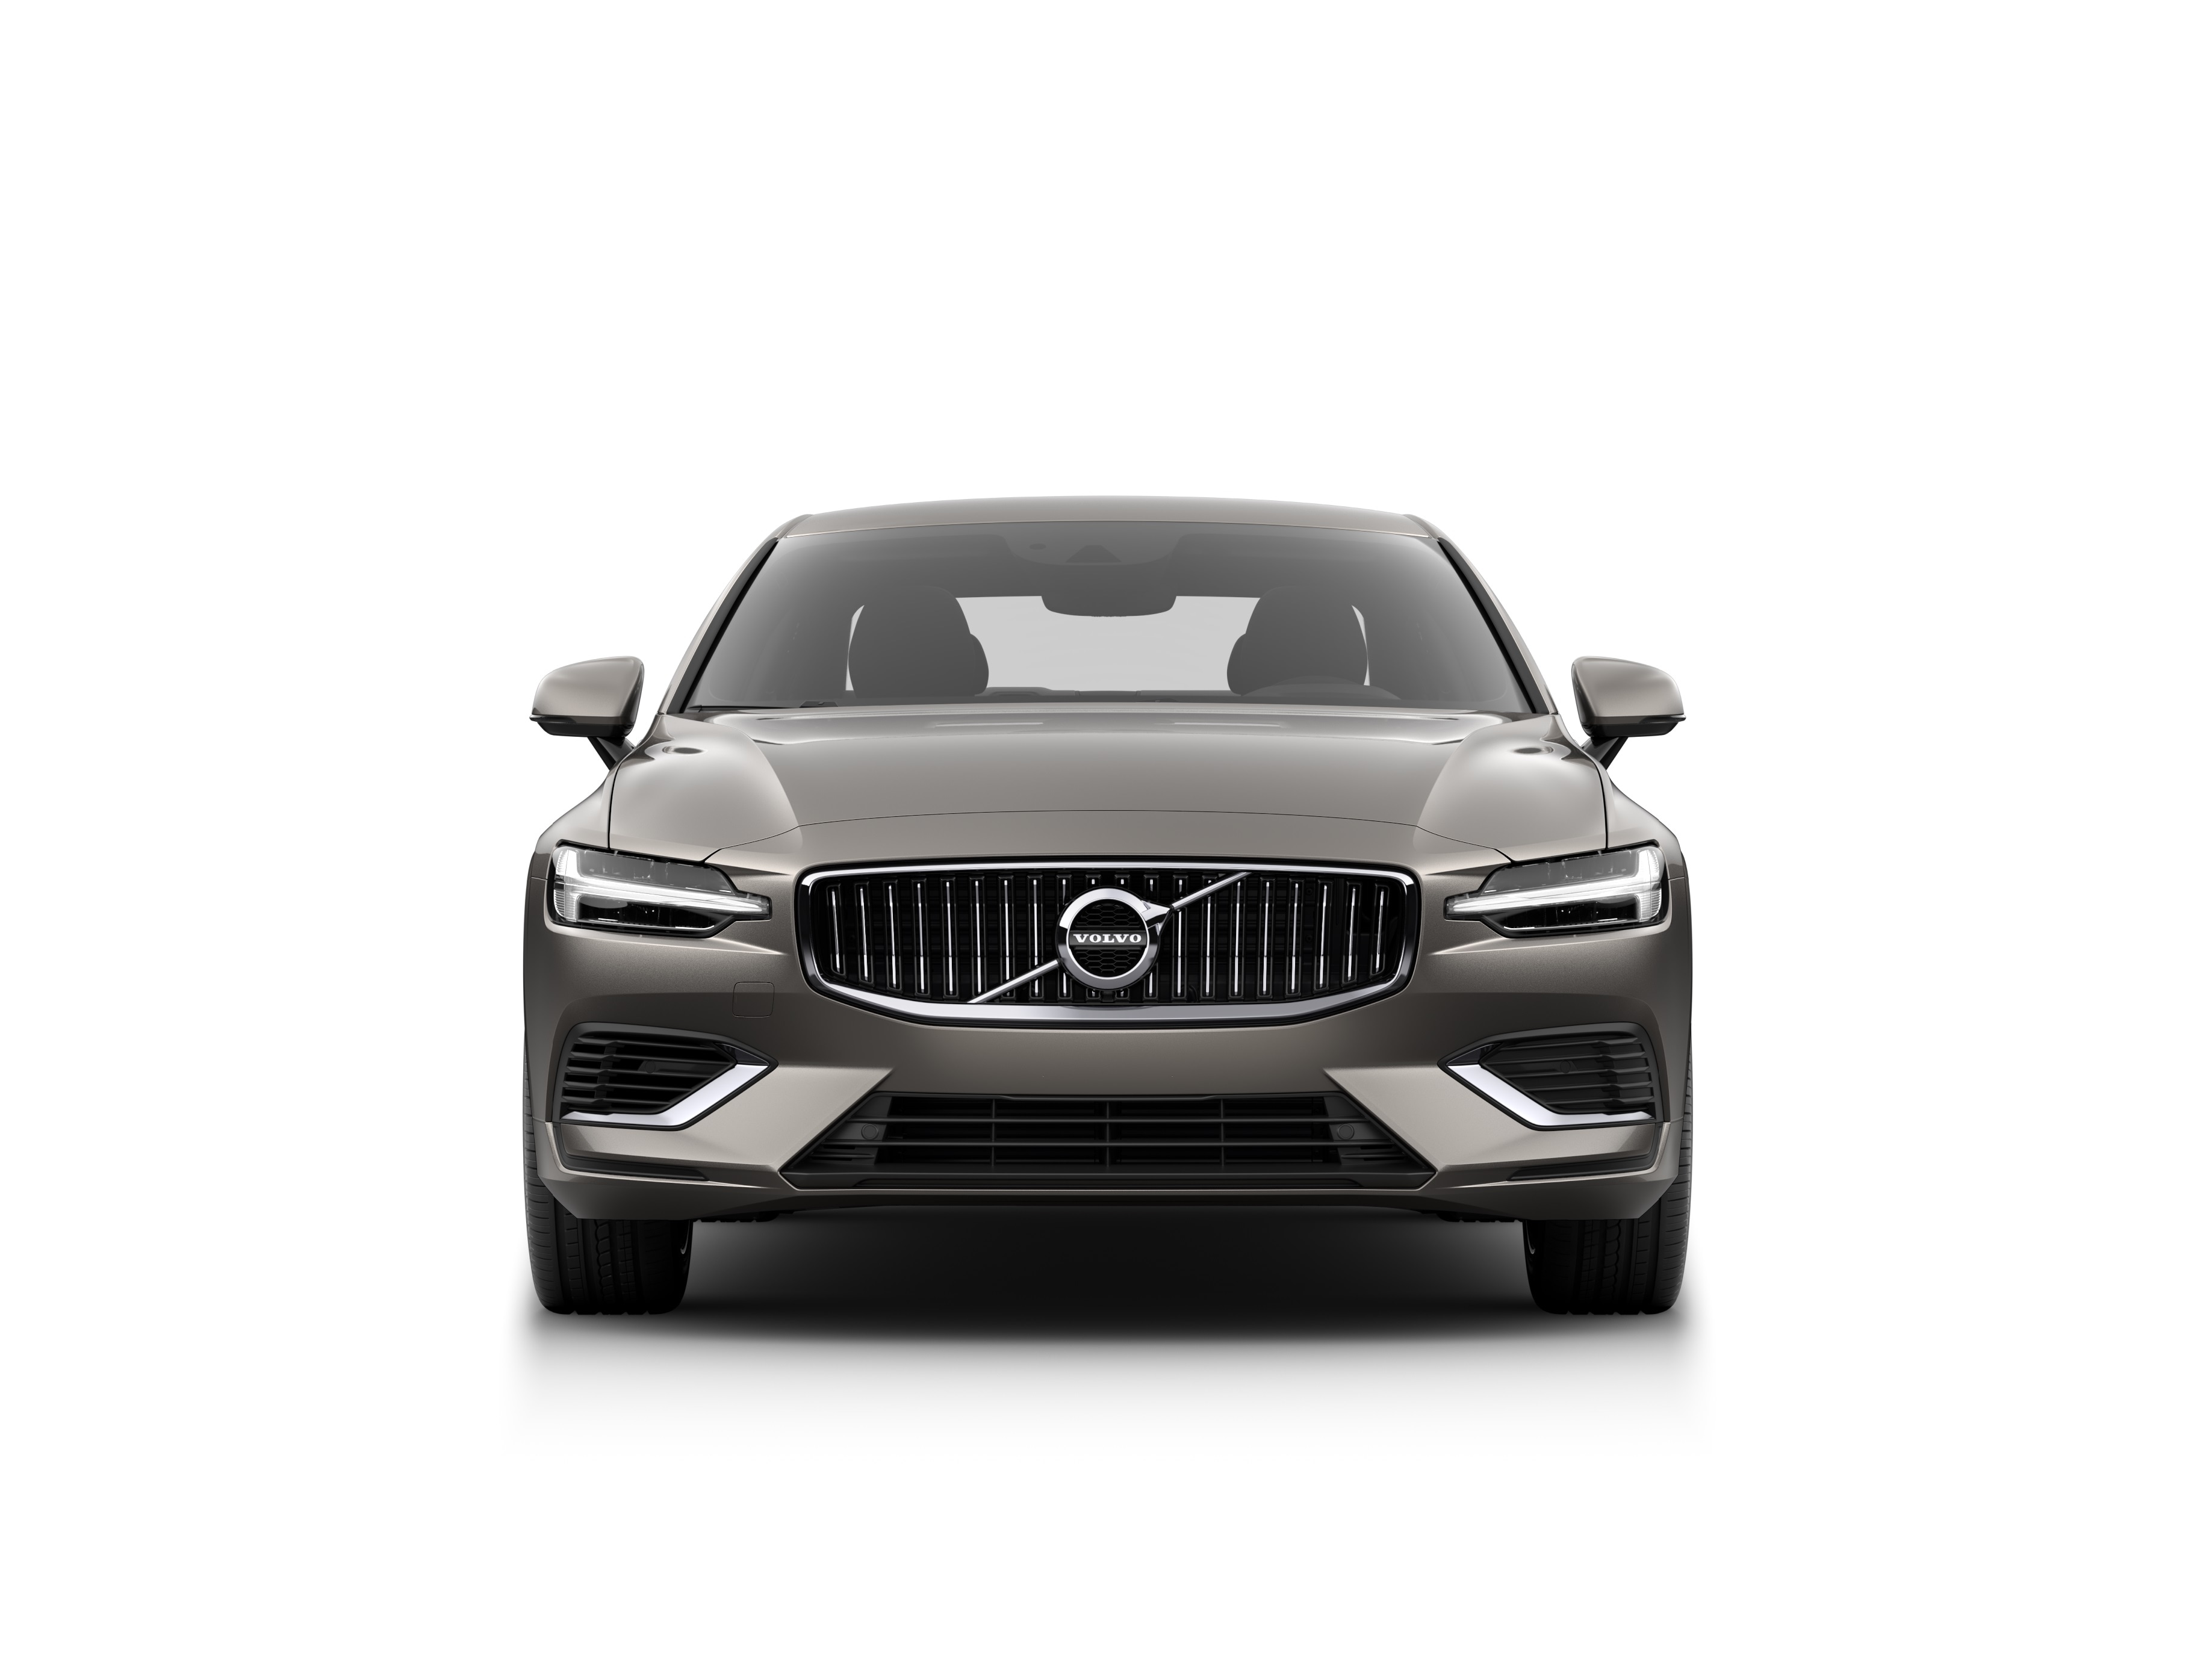 The front of a Volvo S60 sedan.